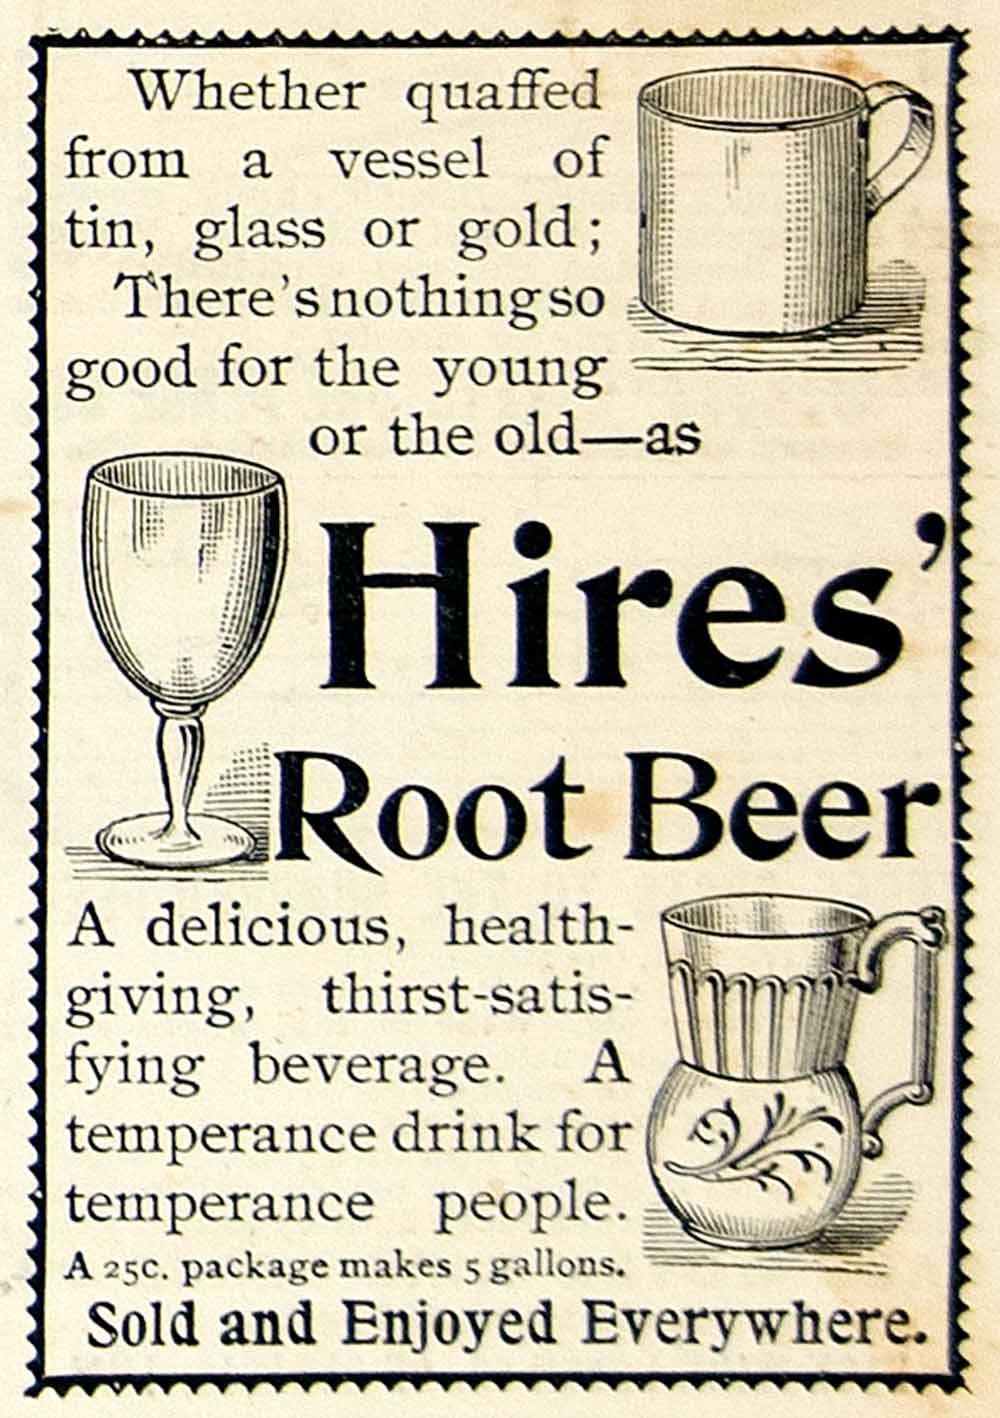 1893 Ad Hires Root Beer Soda Soft Drink Carbonated Beverage Tin Cup Glass CCG1